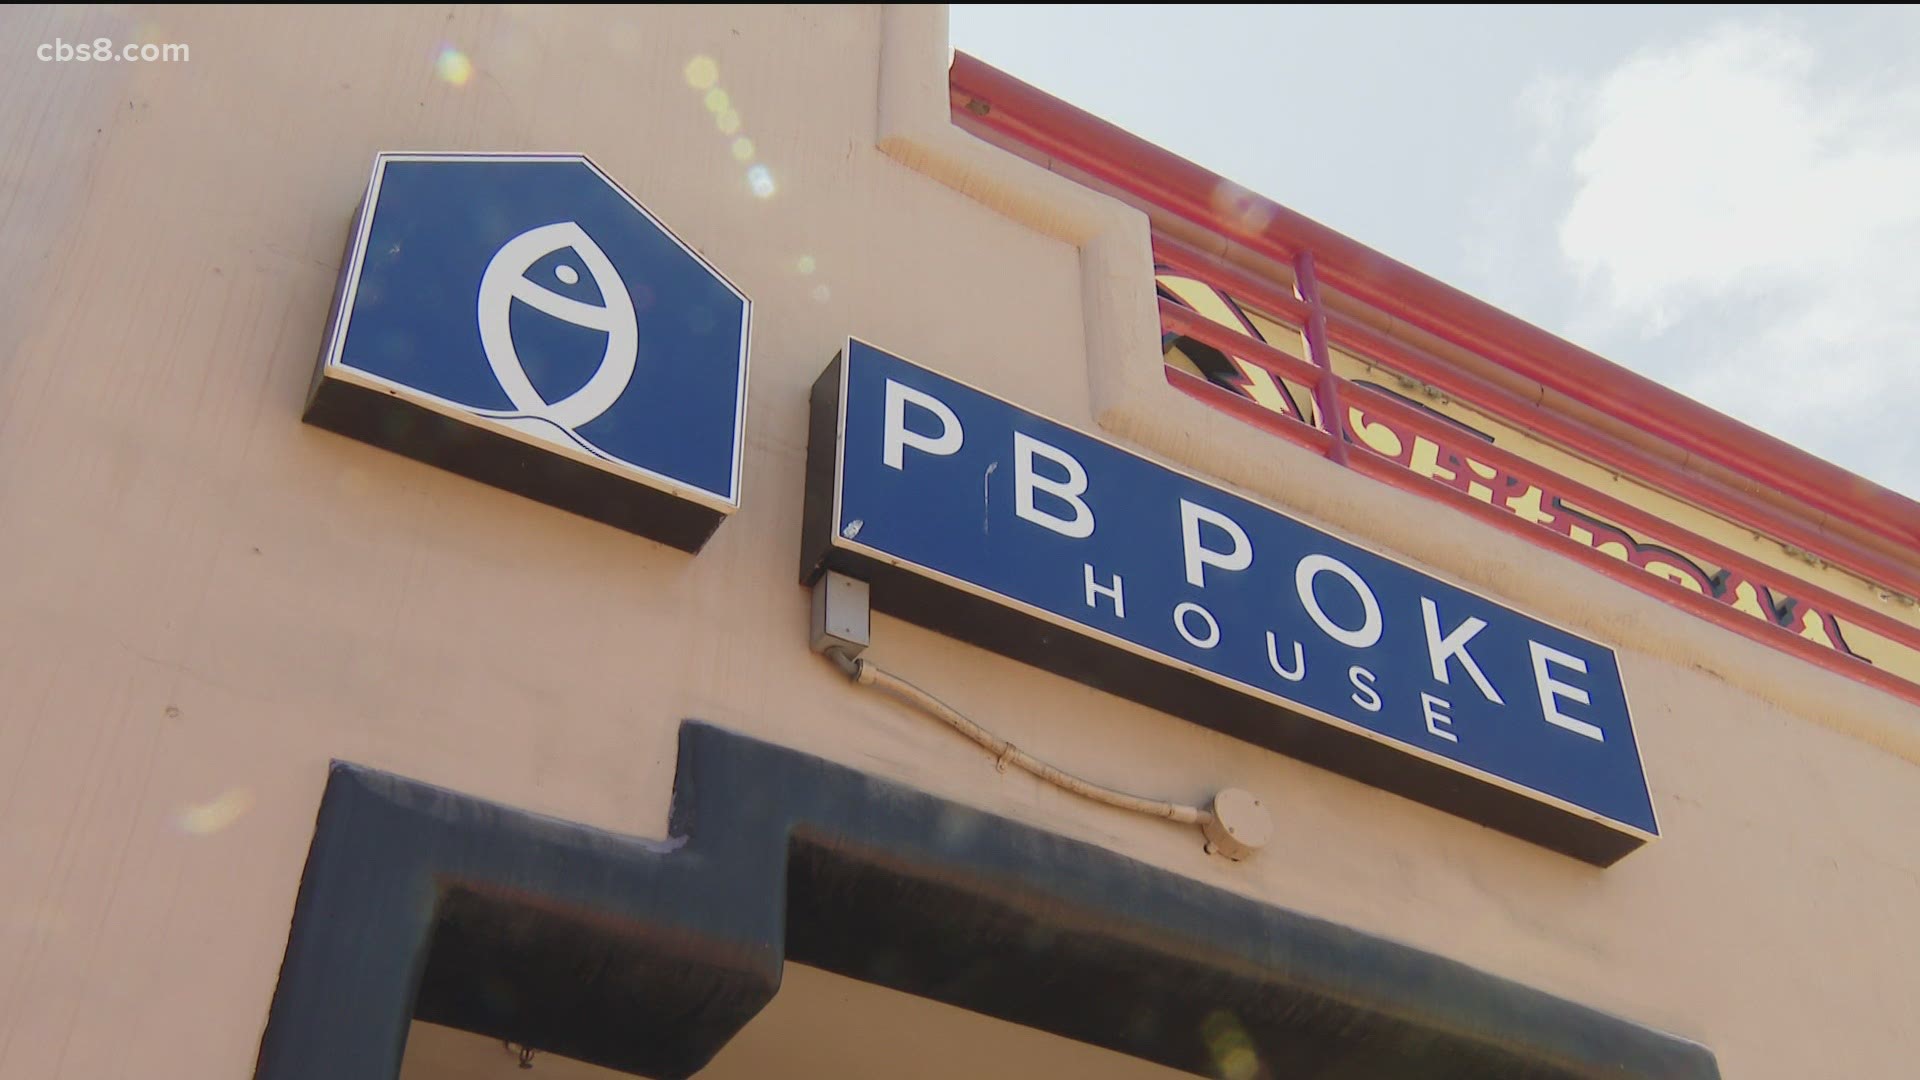 In this segment, we’re featuring PB Poke House. They serve up Hawaiian-inspired poke right in Pacific Beach.